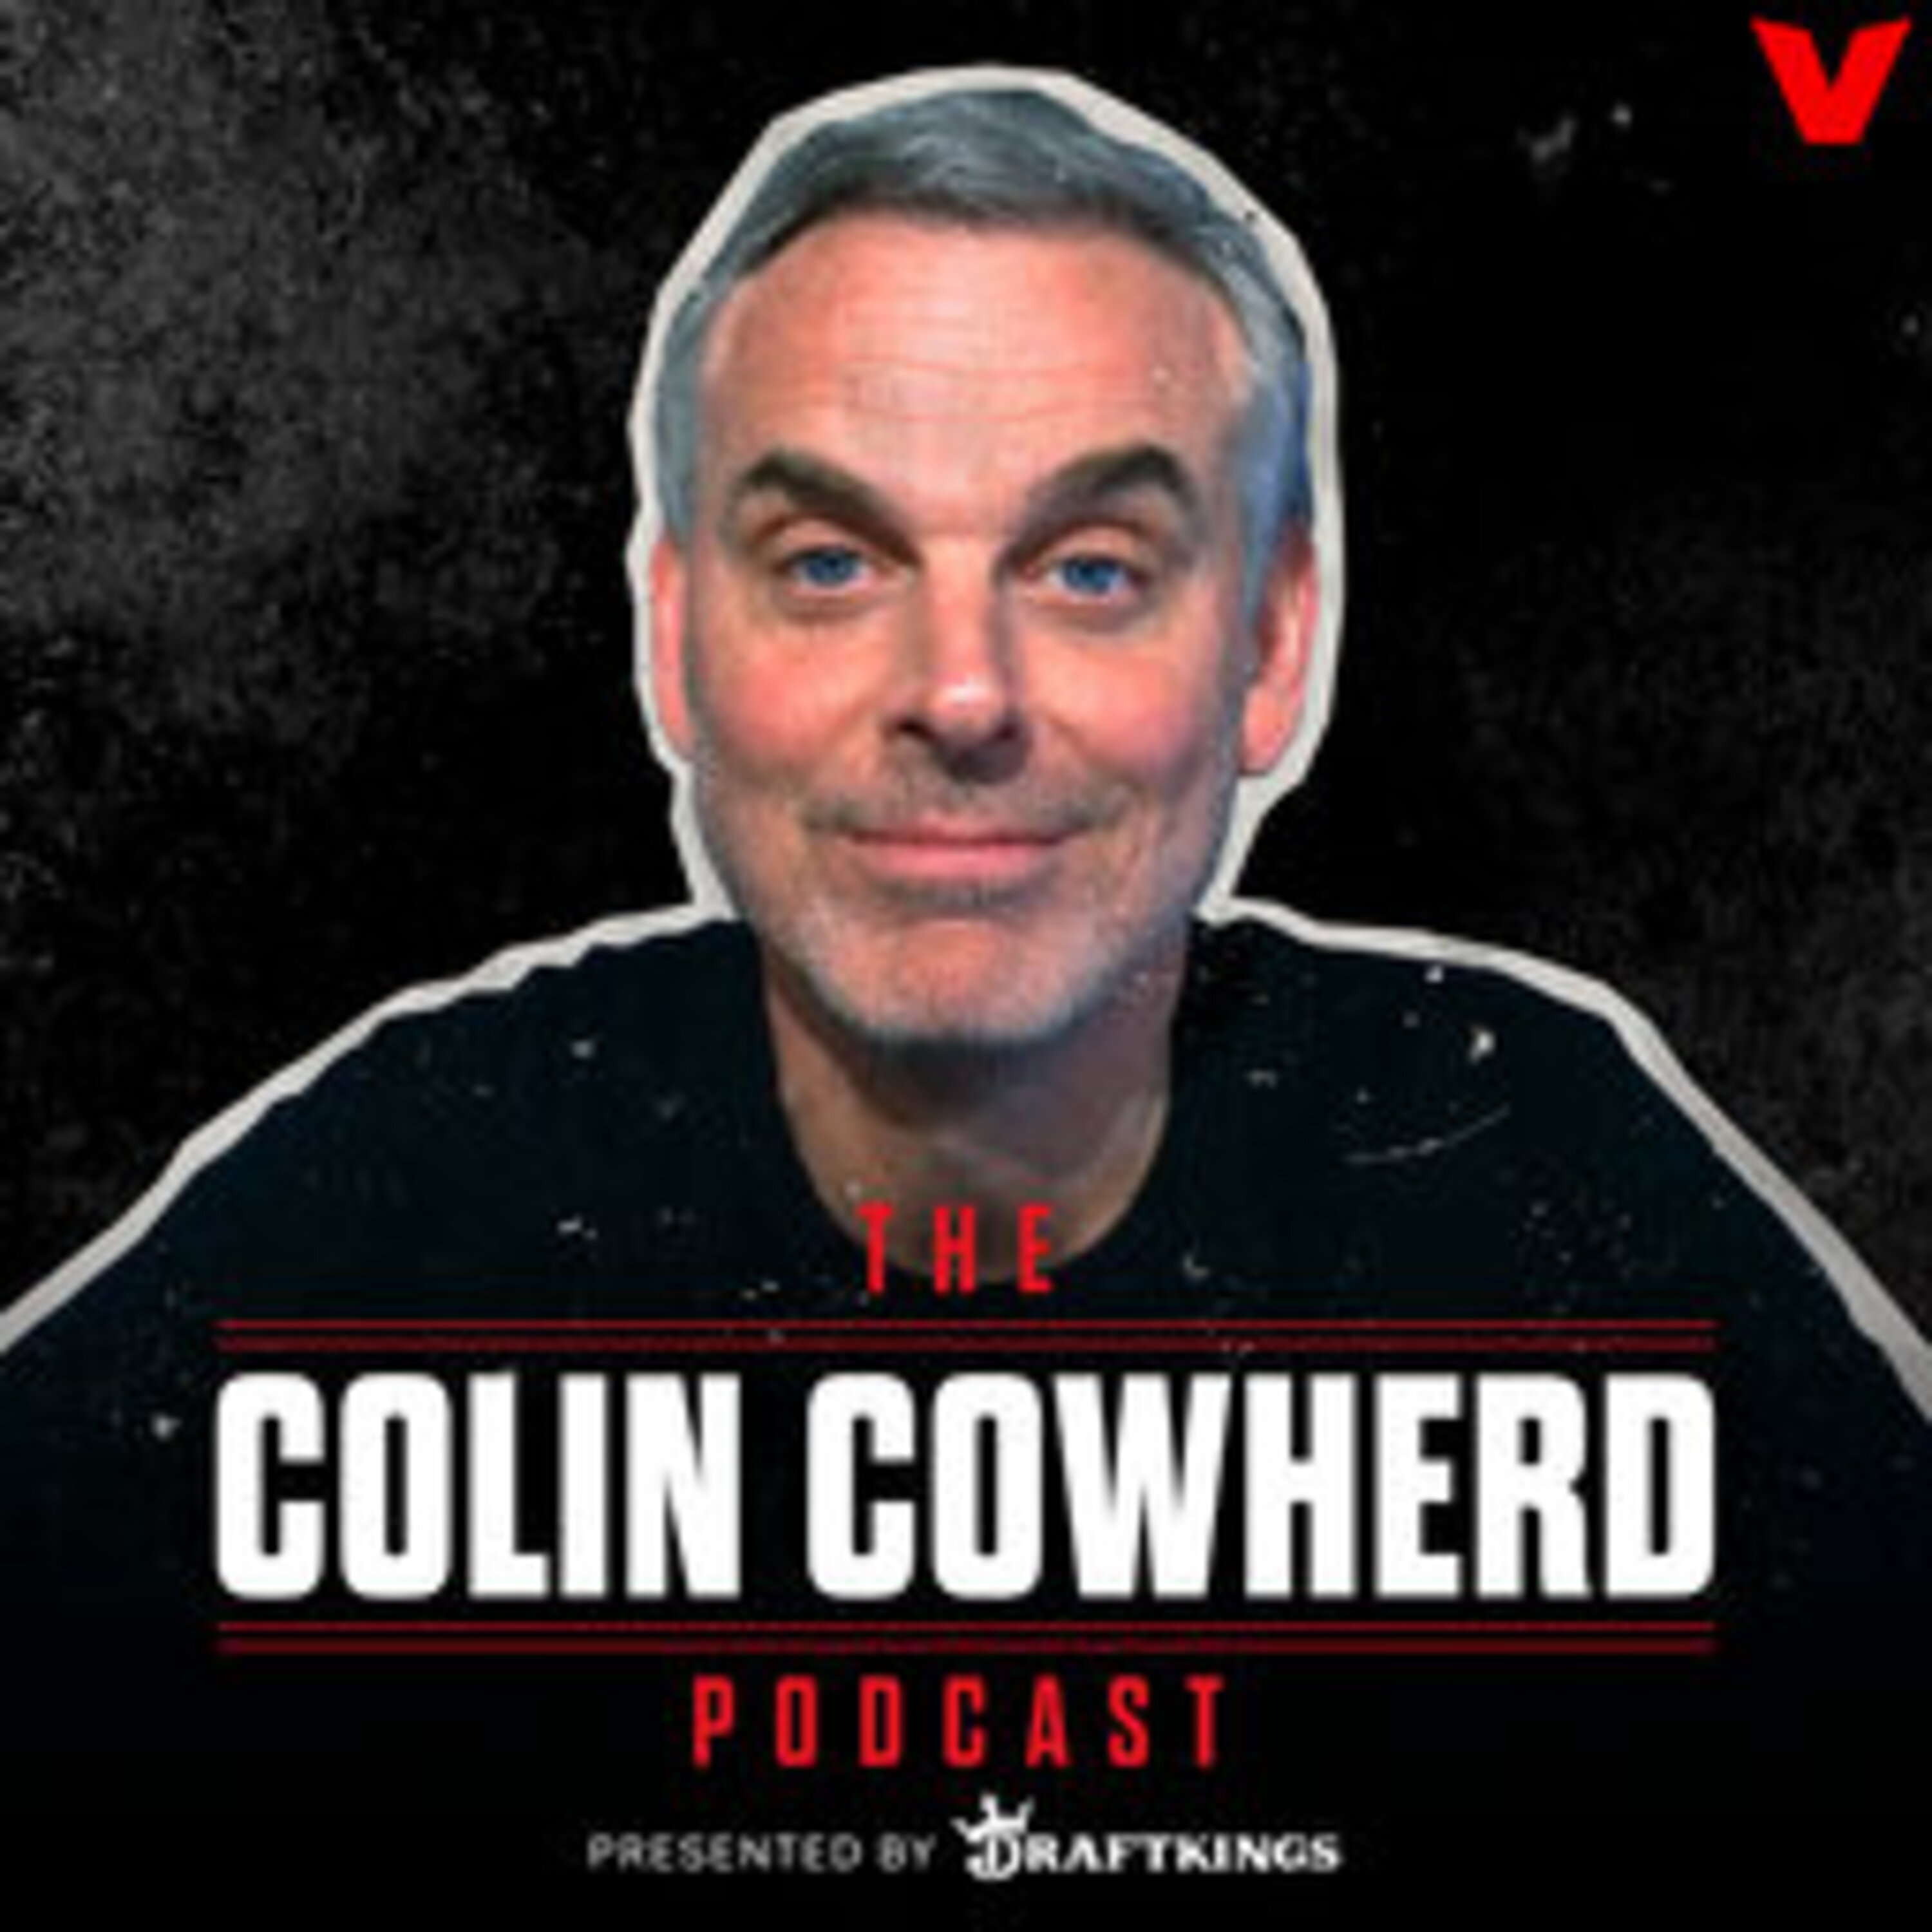 Colin Cowherd Podcast - Jokic Is “Inevitable”, Mavs Are “Lopsided”, The Knicks Have Juice, Embiid NEEDS To Win